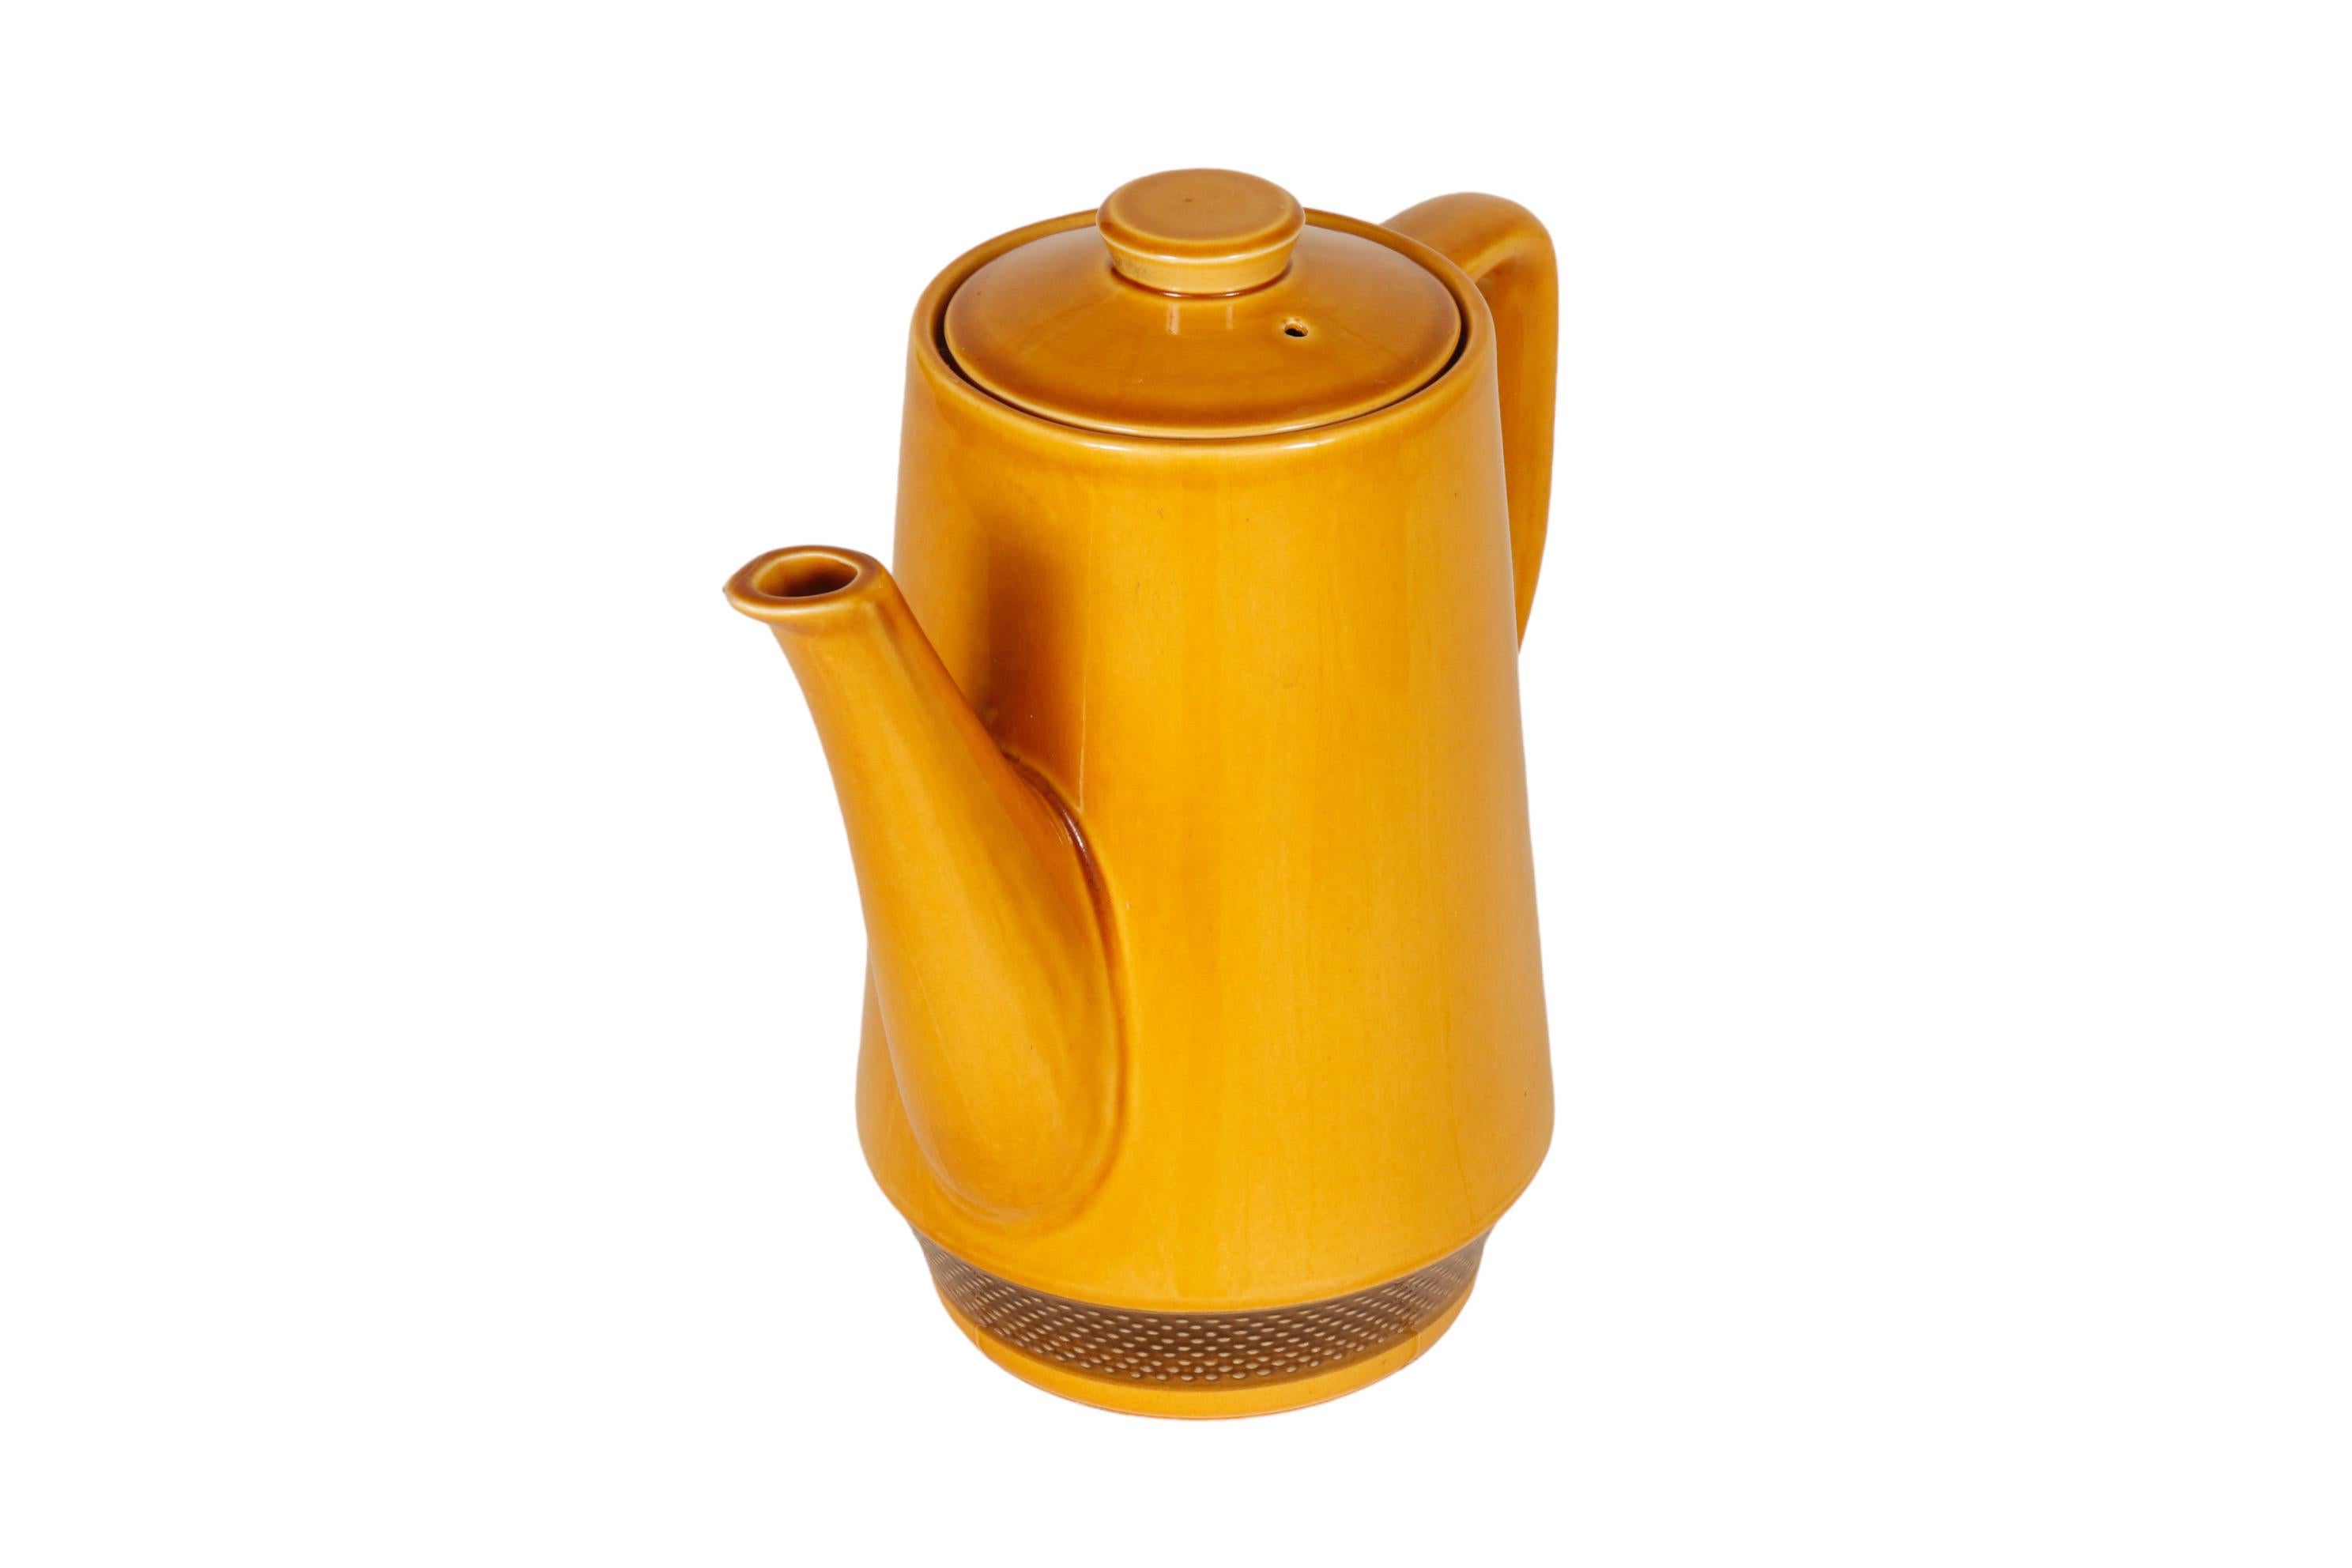 A Japanese mid-century coffee pot in mustard yellow, made by Aurora Ironstone. Sleek lines throughout, with a straight spout and squared handle. The body of the pot is decorated with a brown beaded band around the base. Marked underneath “Aurora